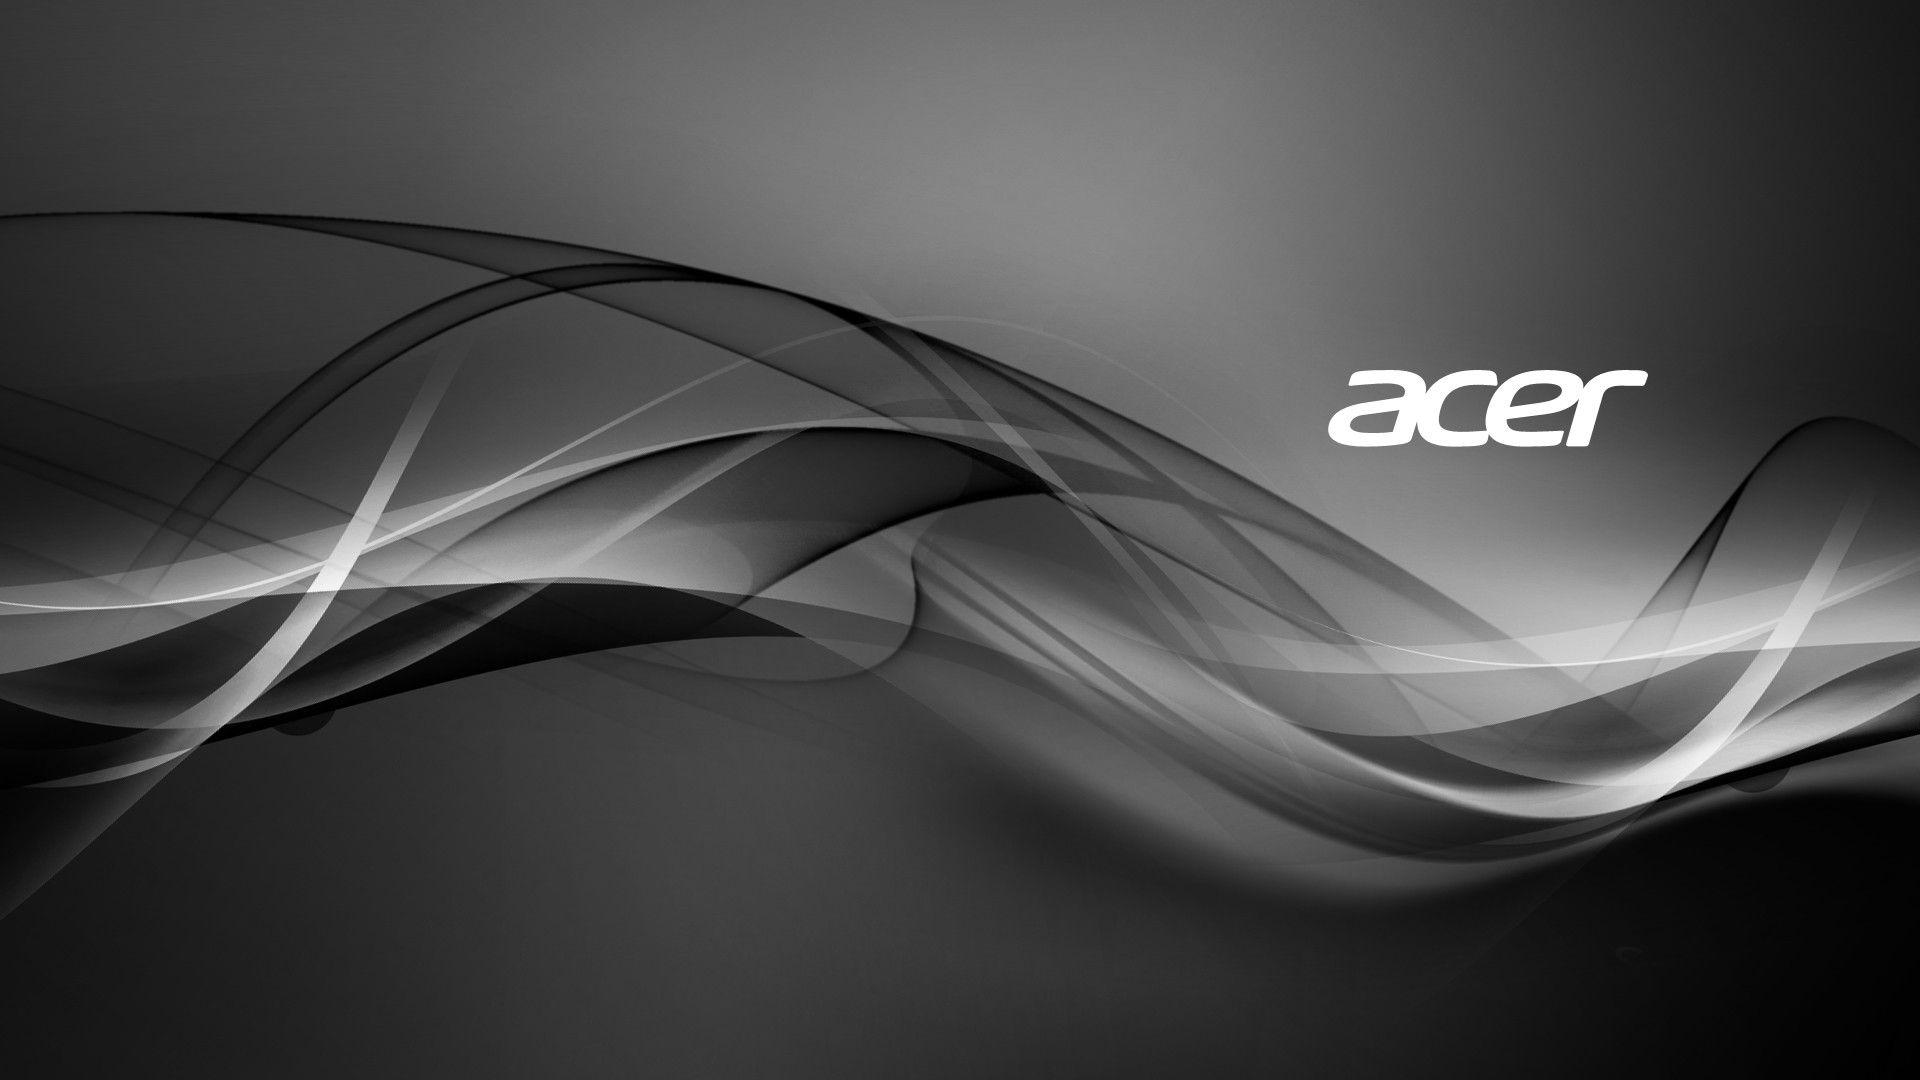 Acer Wallpaper background picture